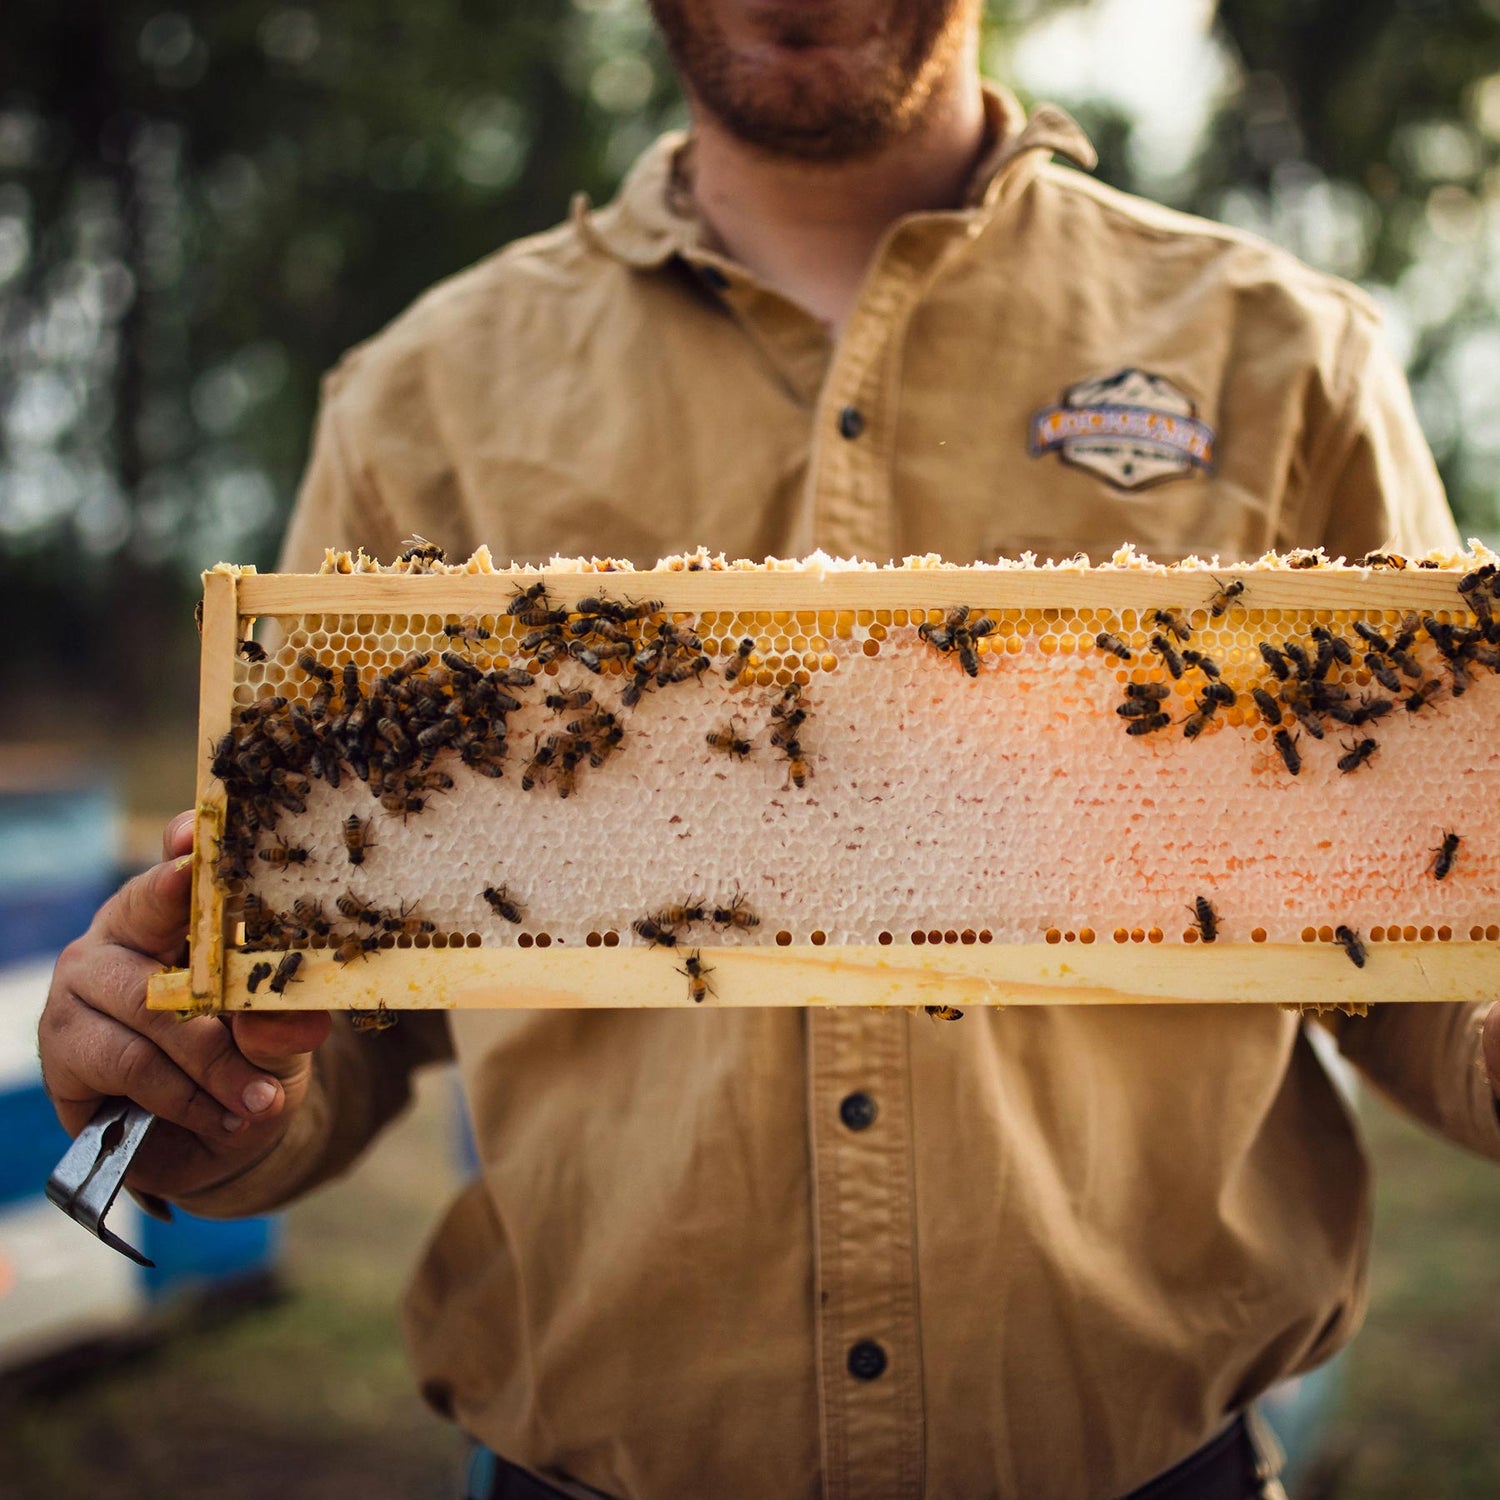 beekeeper holding frame with bees and honeycomb